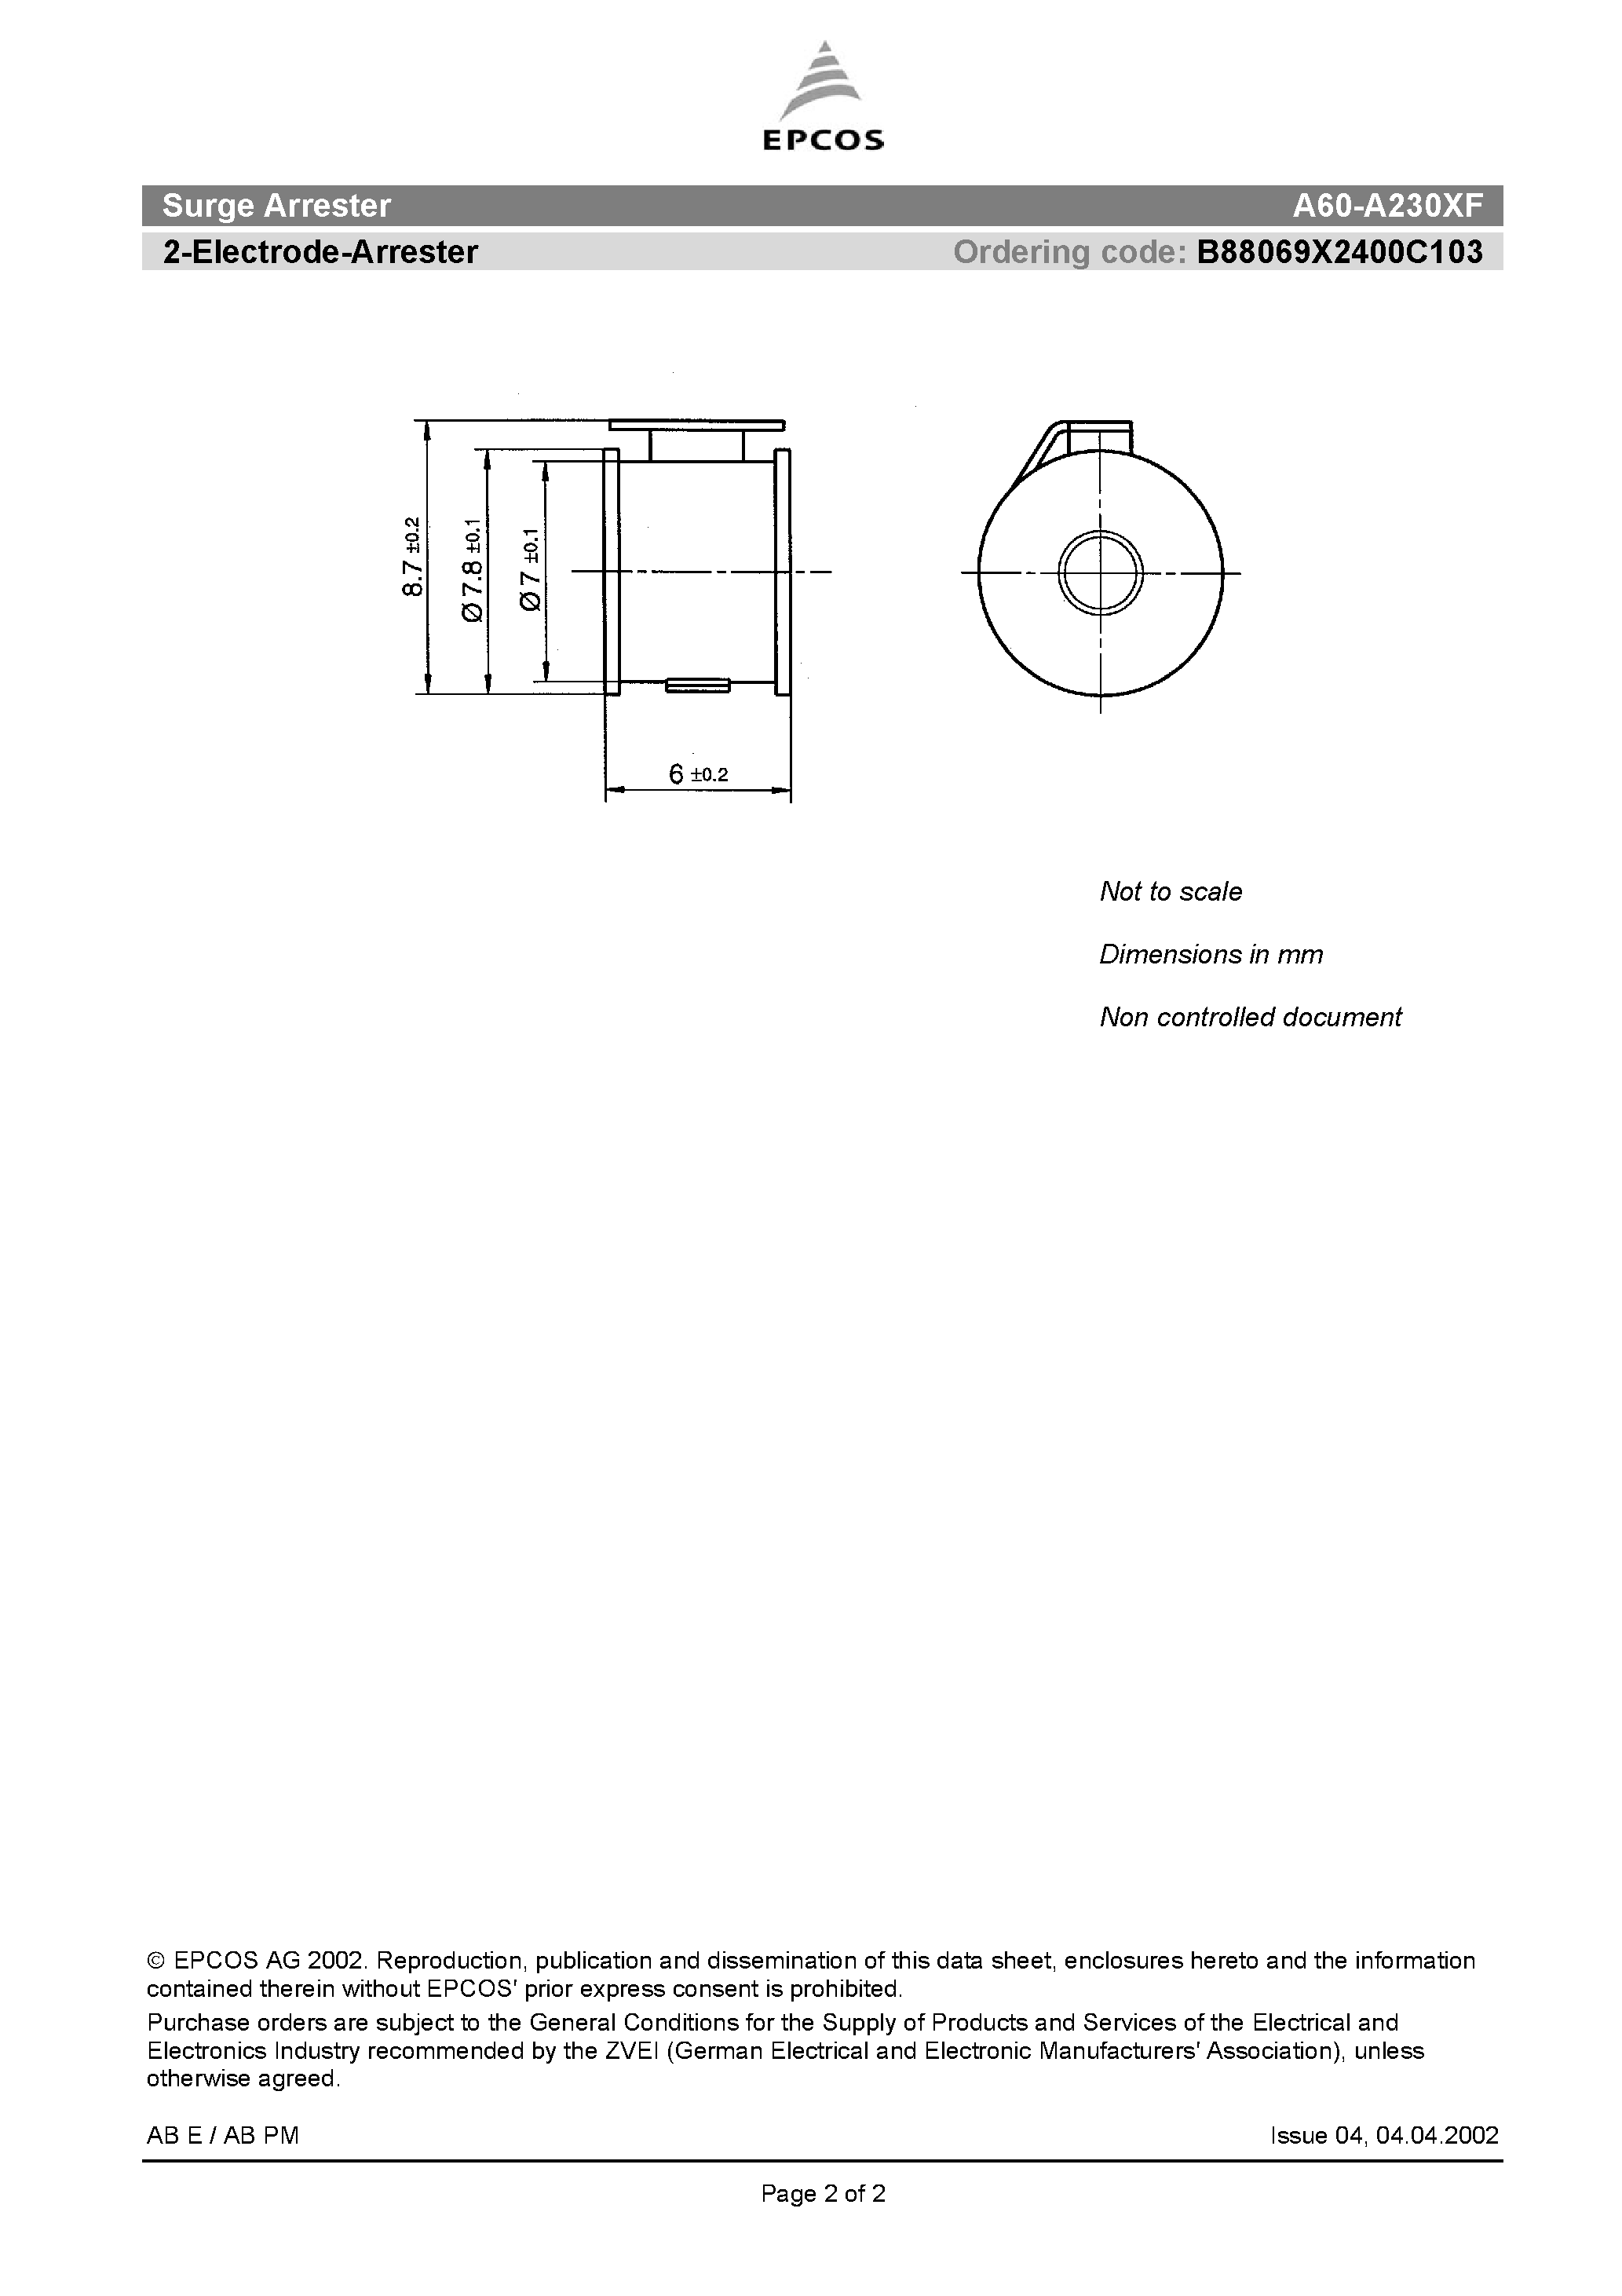 Datasheet A60-A230XF - 2-Electrode-Arrester page 2